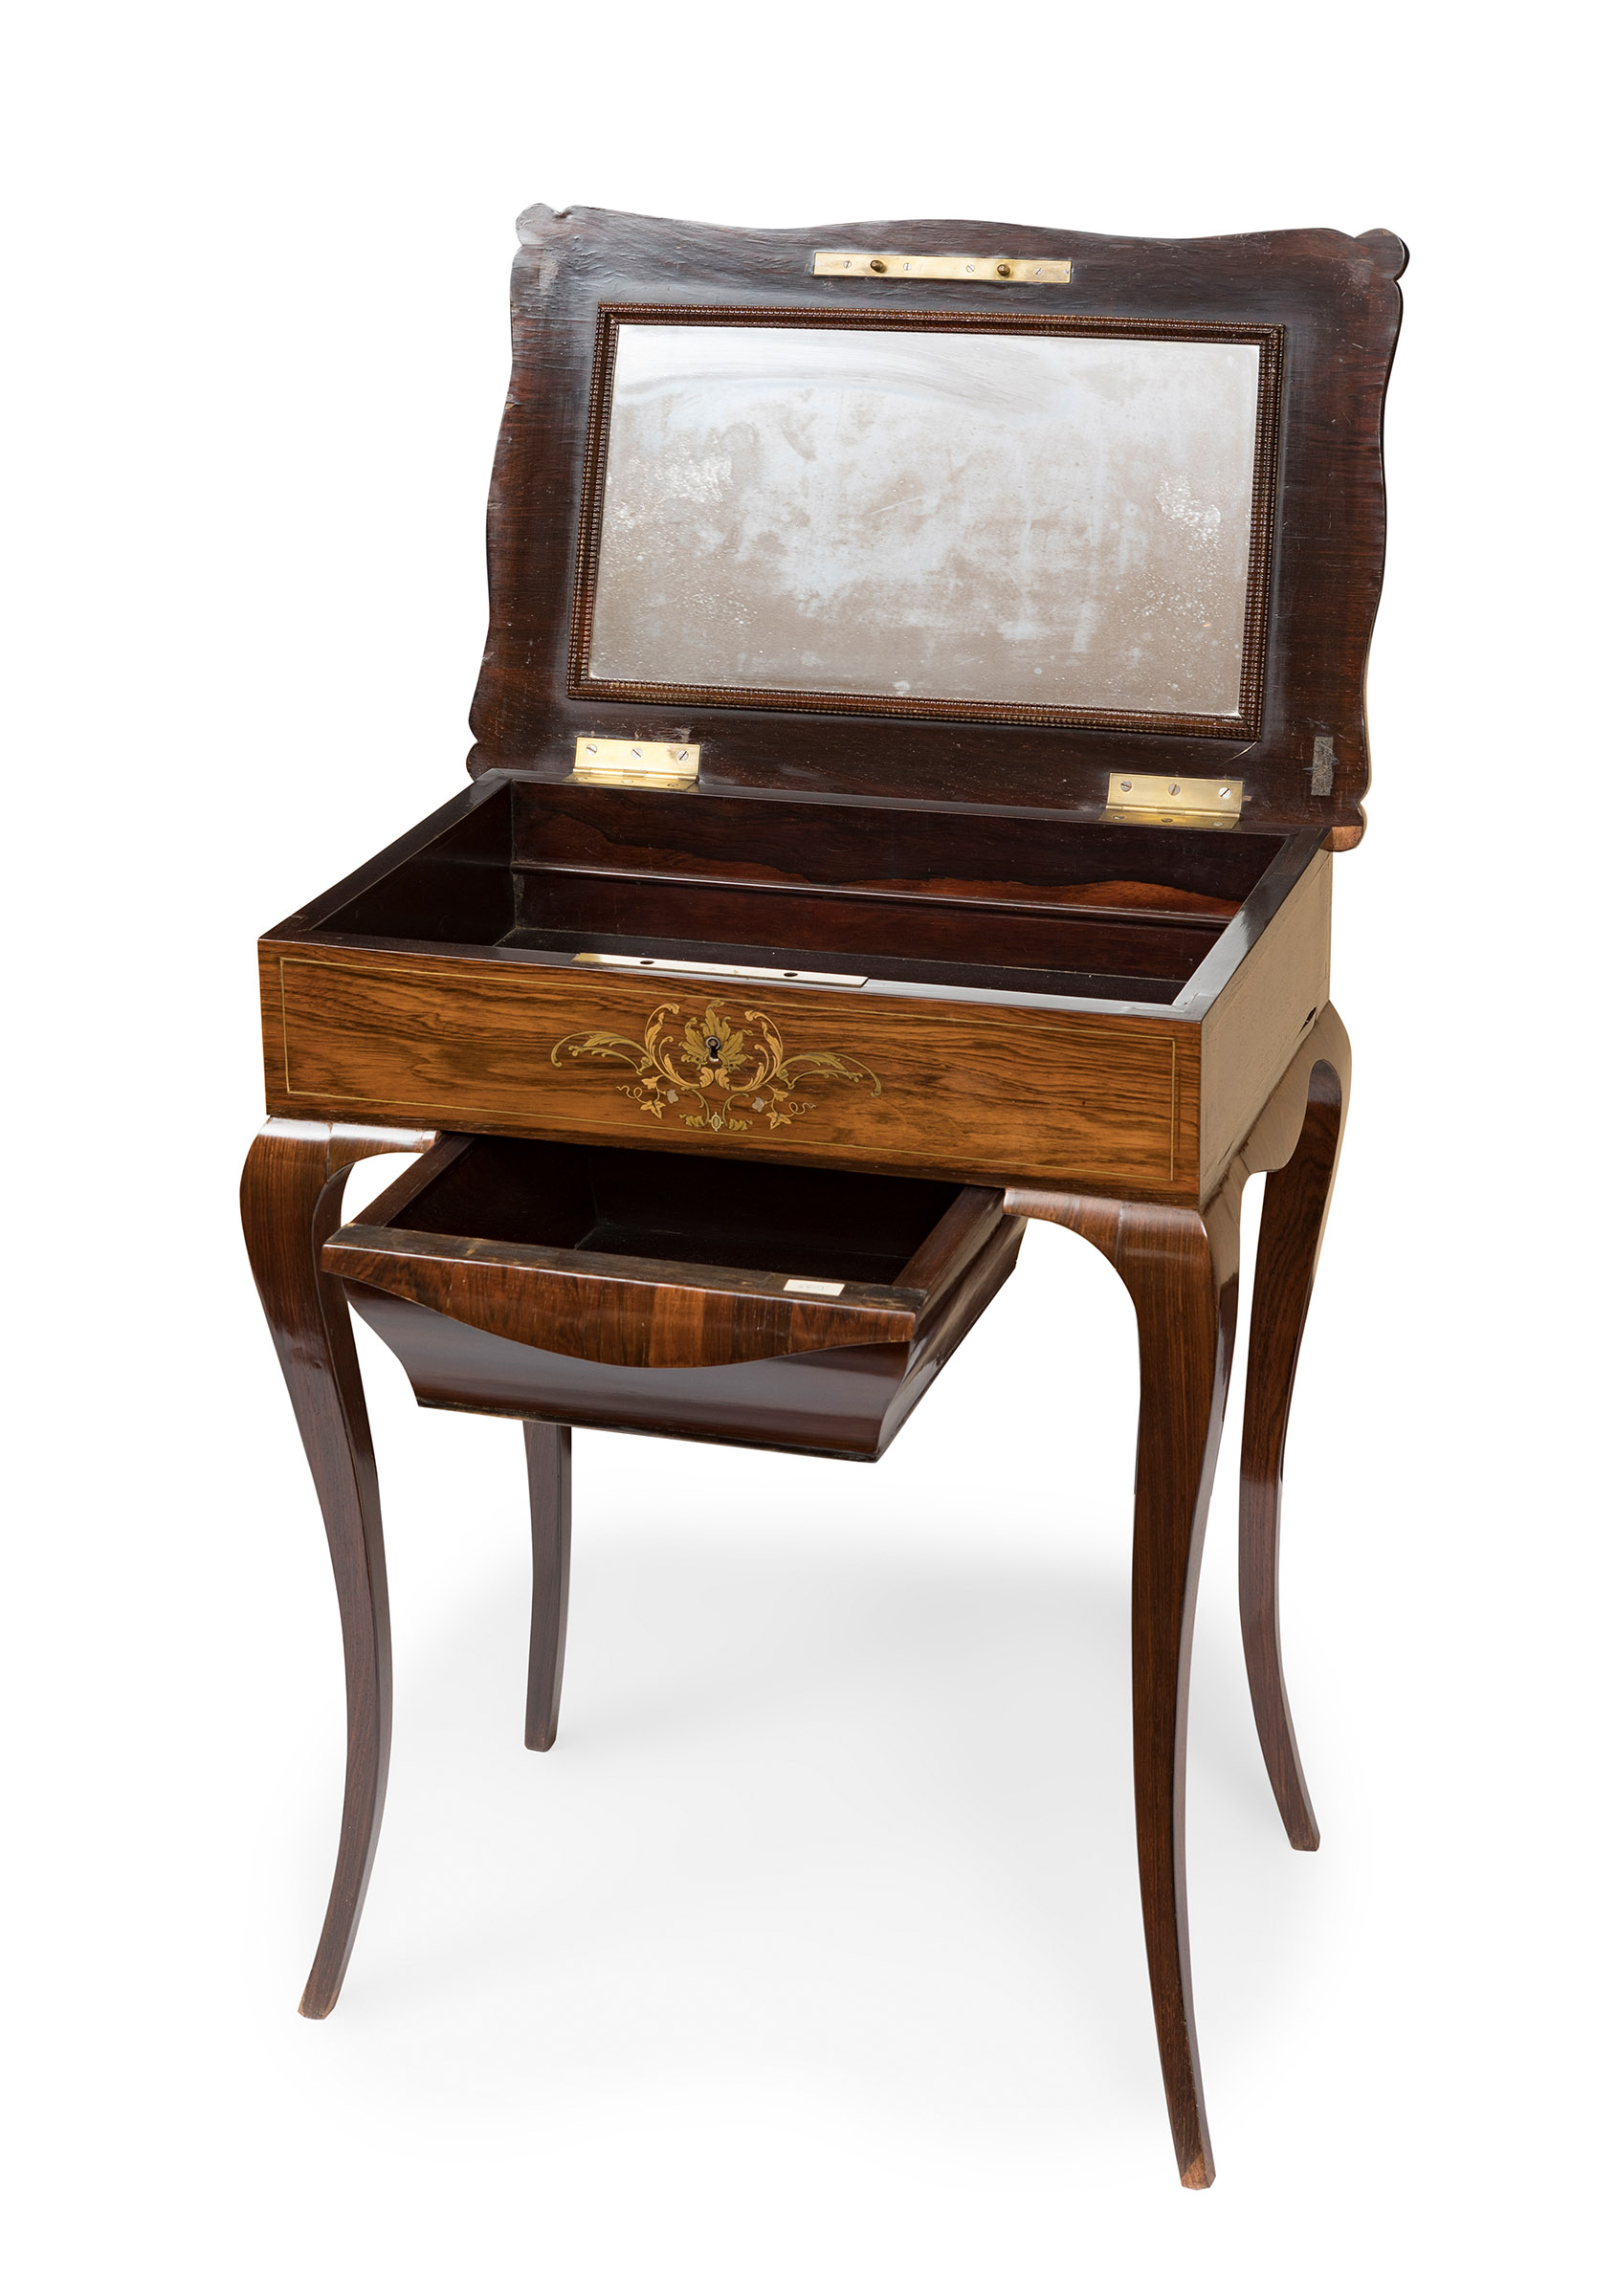 Side table. England, 19th century.Rosewood and brass.Measurements: 72 x 57 x 38 cm.Side table of - Image 5 of 5